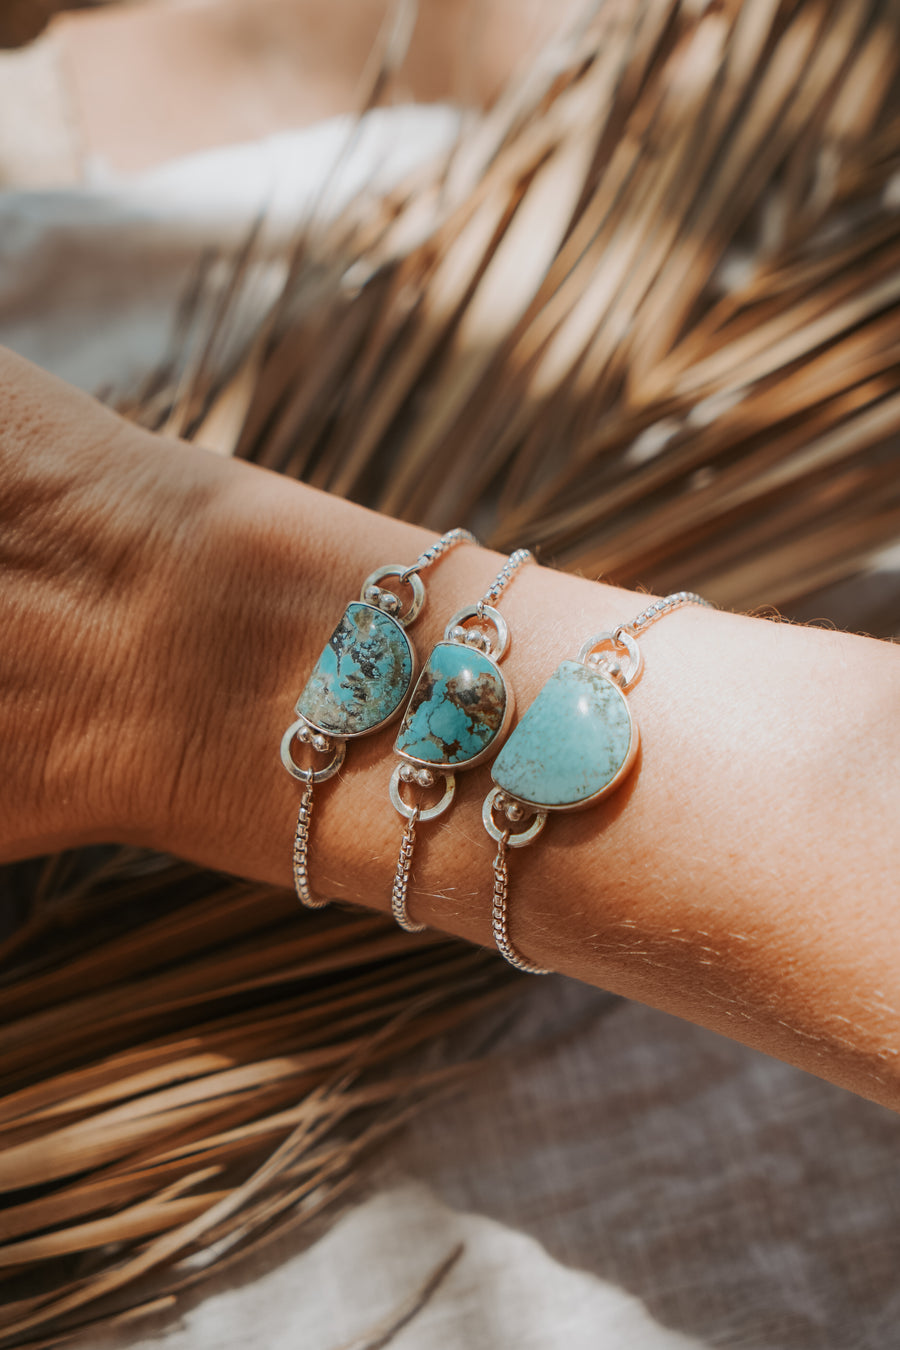 The Out West Adjustable Bracelet in Sandhill Turquoise